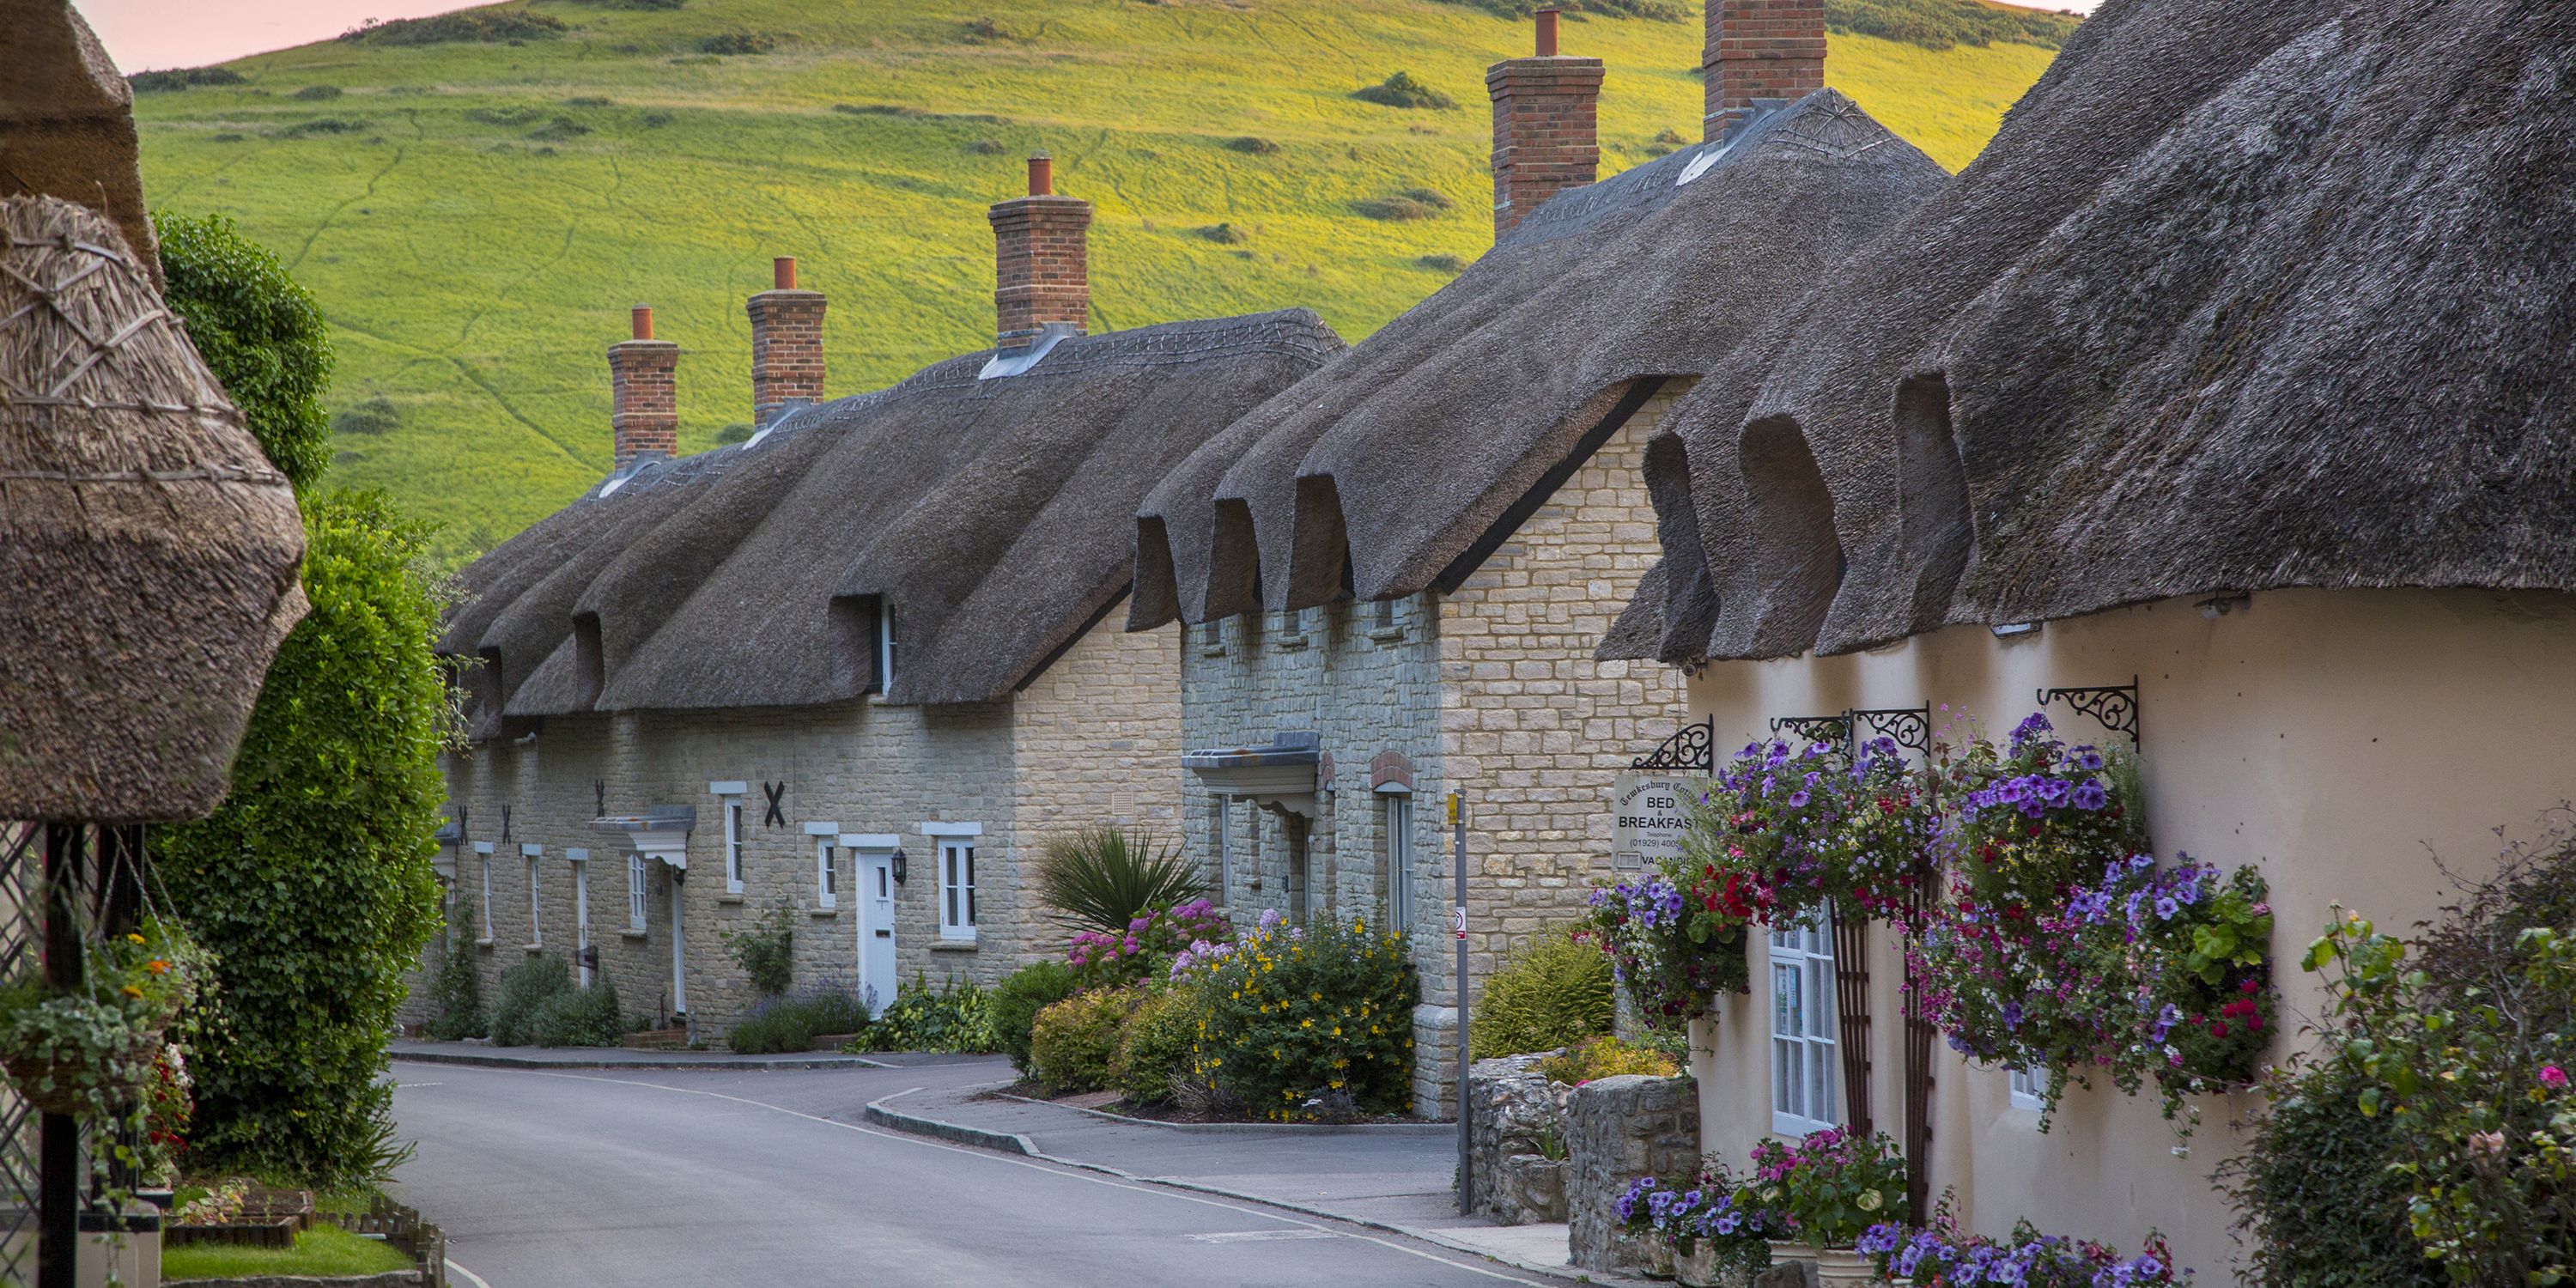 11 Photos Of English Country Cottages That Make Us Want One Right Now